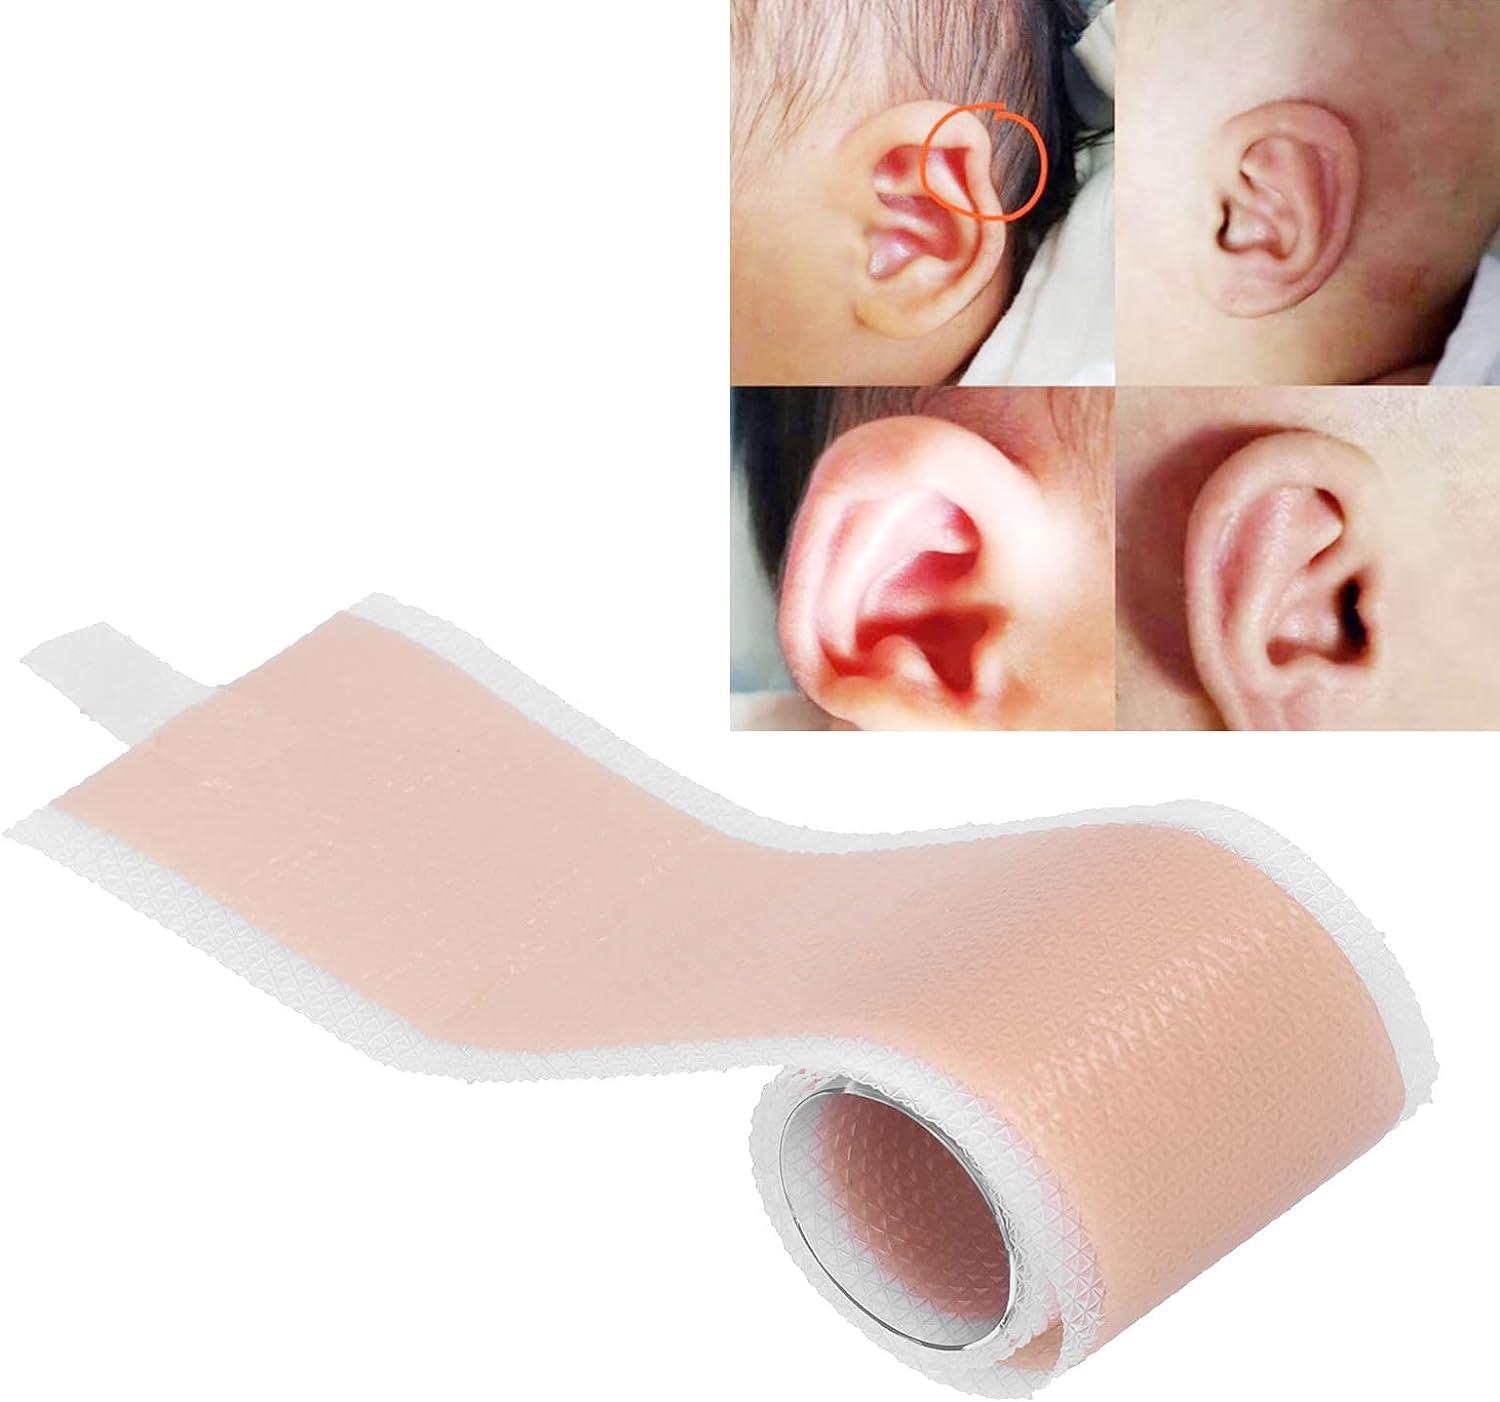 Ear Corrector Contain 30 Ear Tape Solve Big Ear Problem with Ear Stickers  by Pinning Back Ears Cosmetic Aesthetic Correctors for Prominent Ears  Waterproof Ear Correctors Sticks for Adults